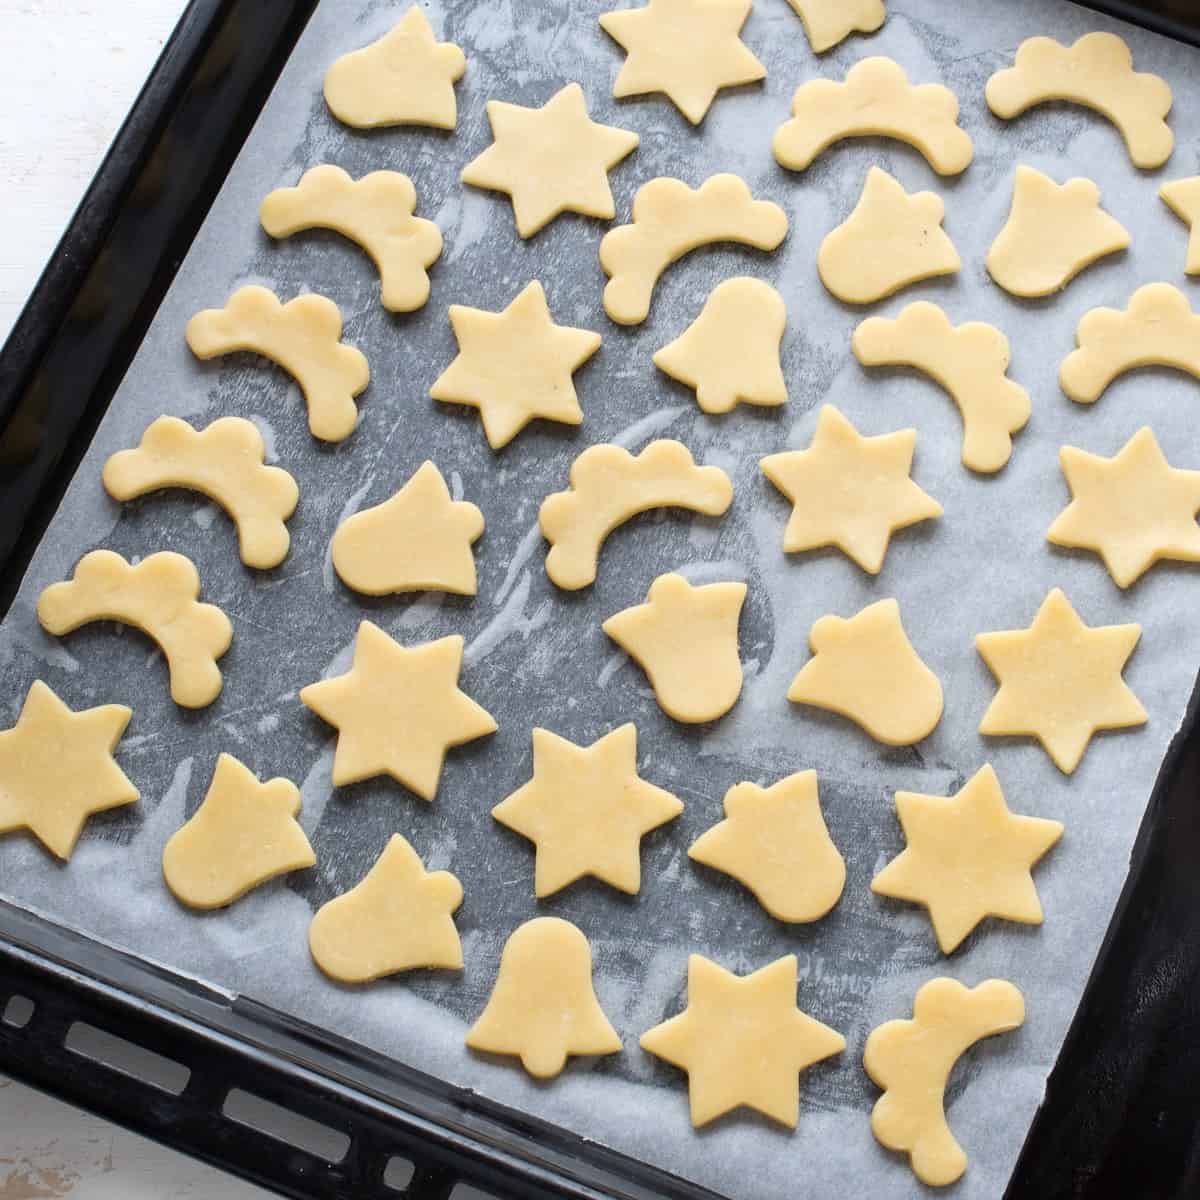 Cookie cutouts arranged on a baking sheet.